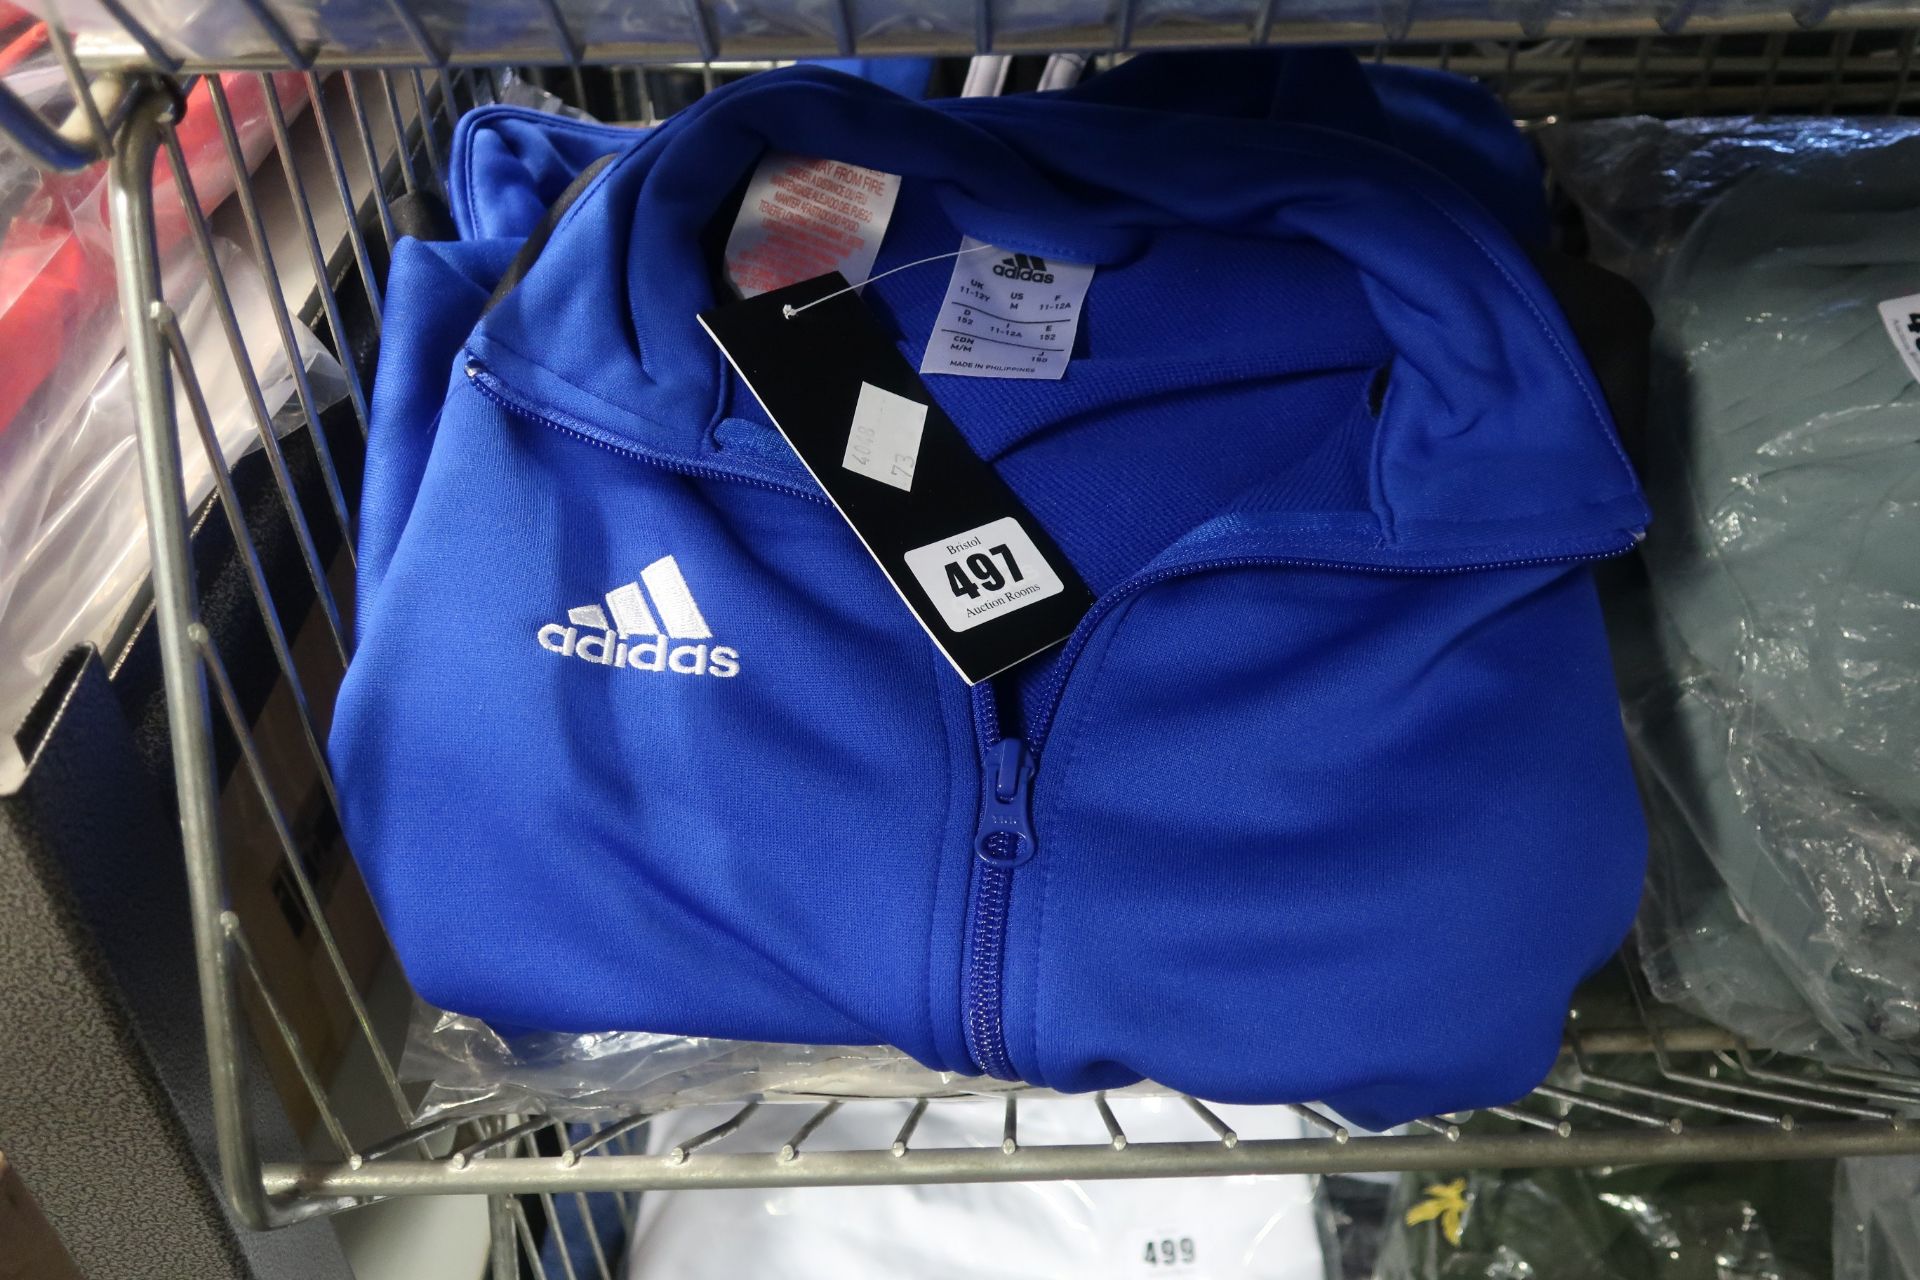 Six as new Adidas Regista 18 jackets in blue and black (Children's sizes).